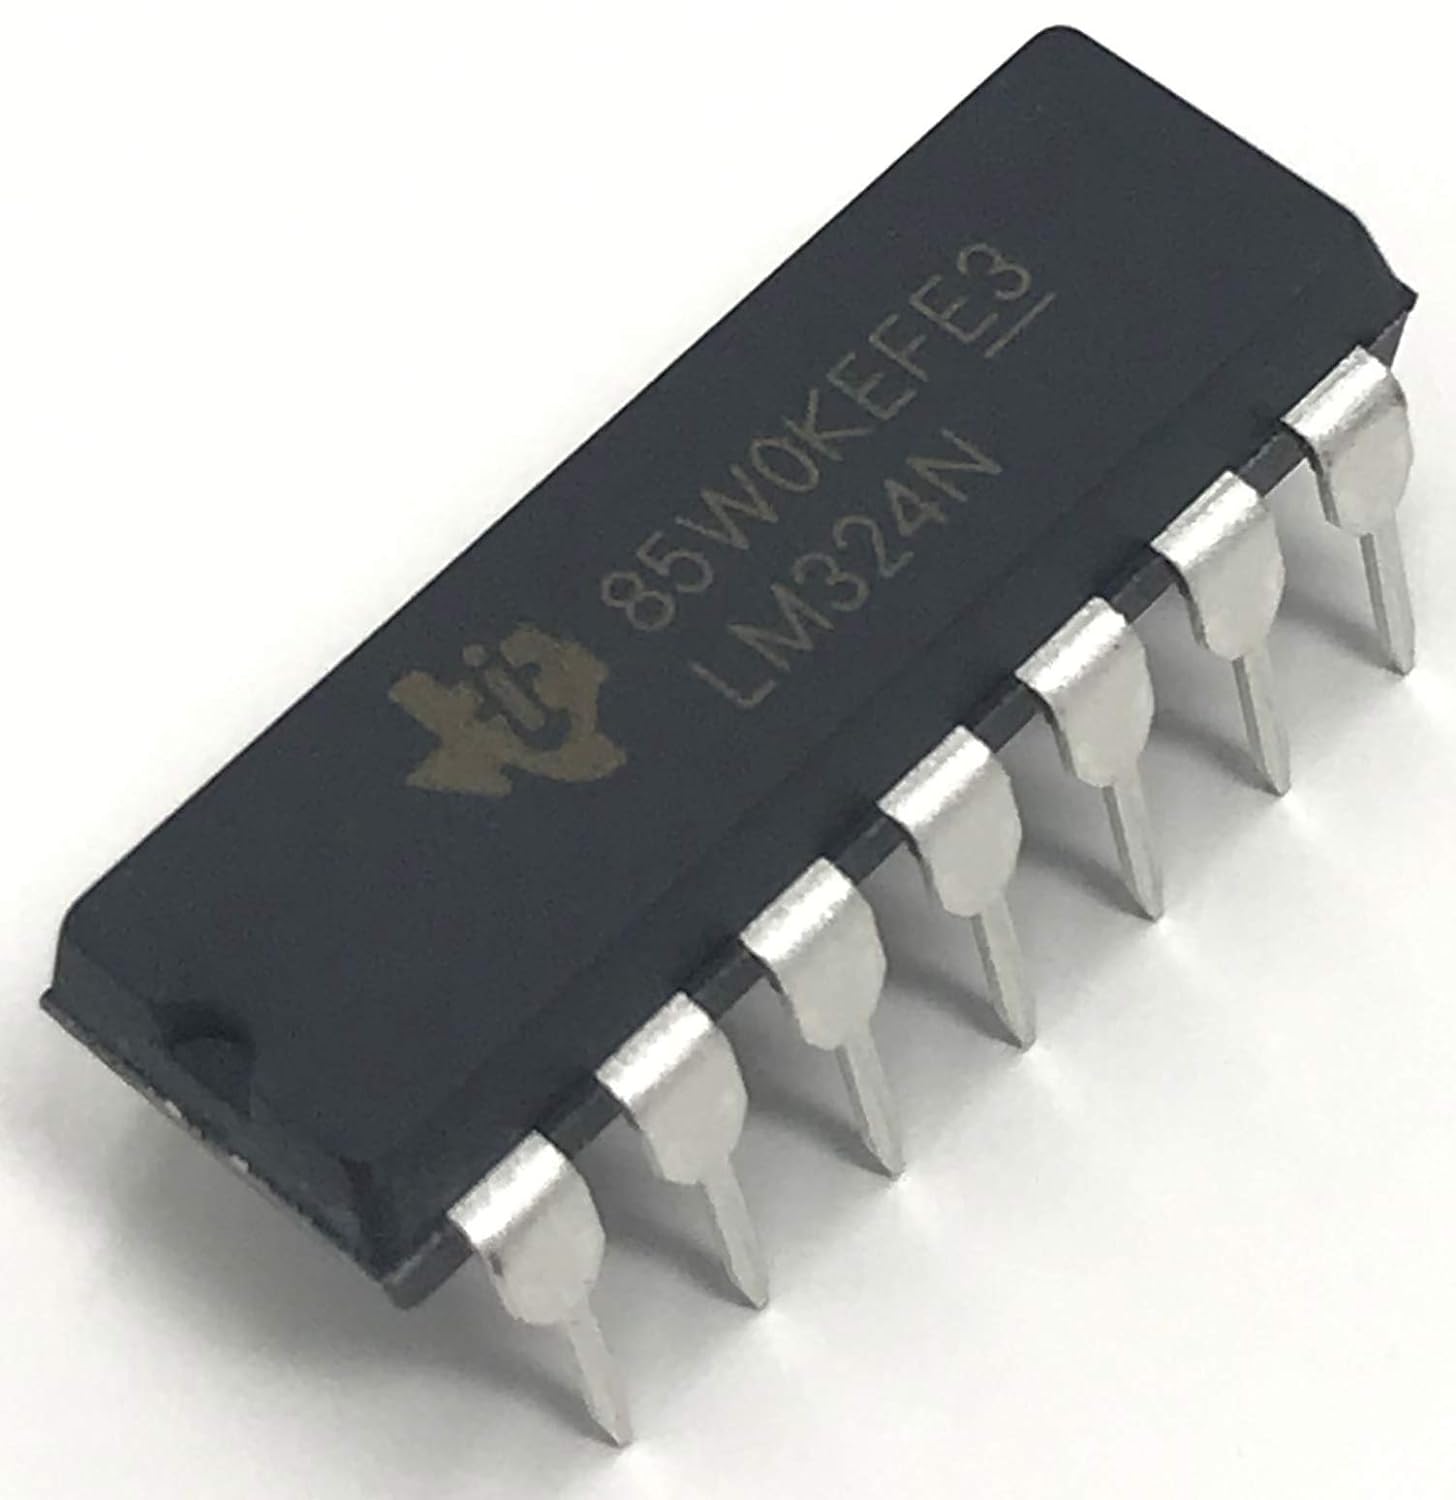 For more information about the specifications and products of the LM324 chip, you can consult the relevant information through lkrelec, we not only provide you with free samples, but also the LM324 series of chips produced by several well-known manufacturers.    How does the LM324 work